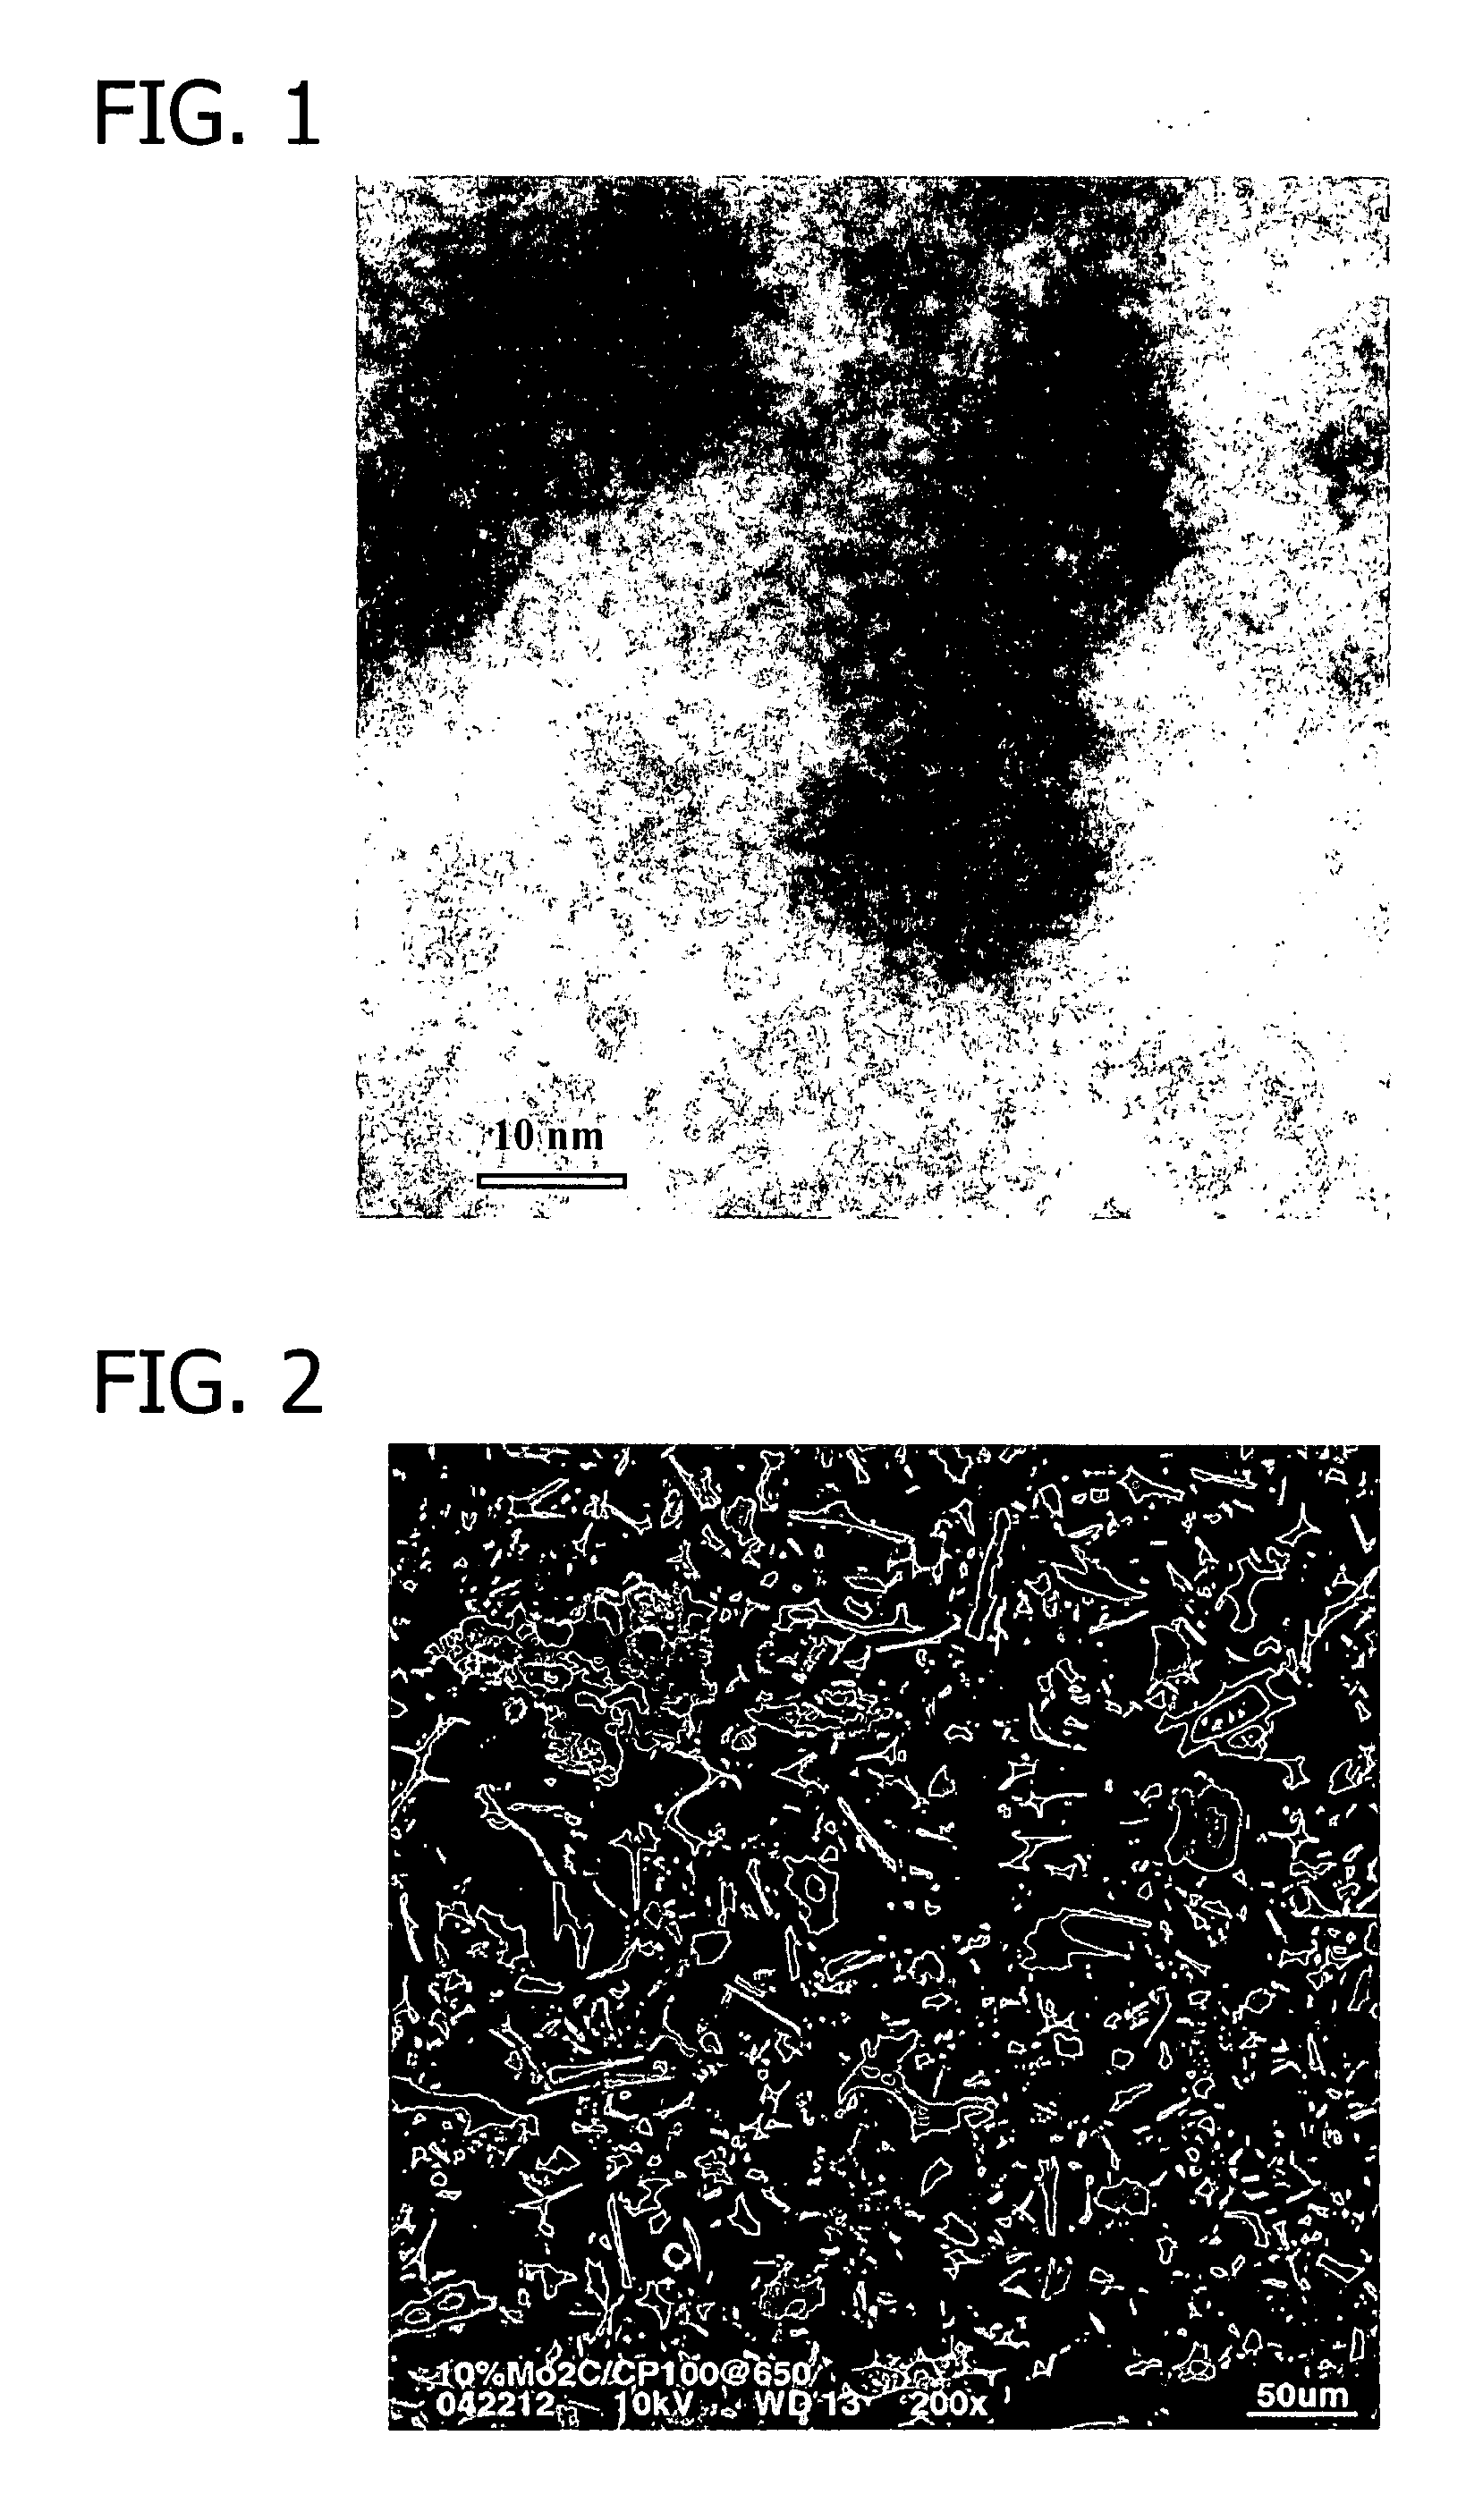 Transition metal-containing catalysts and processes for their preparation and use as fuel cell catalysts